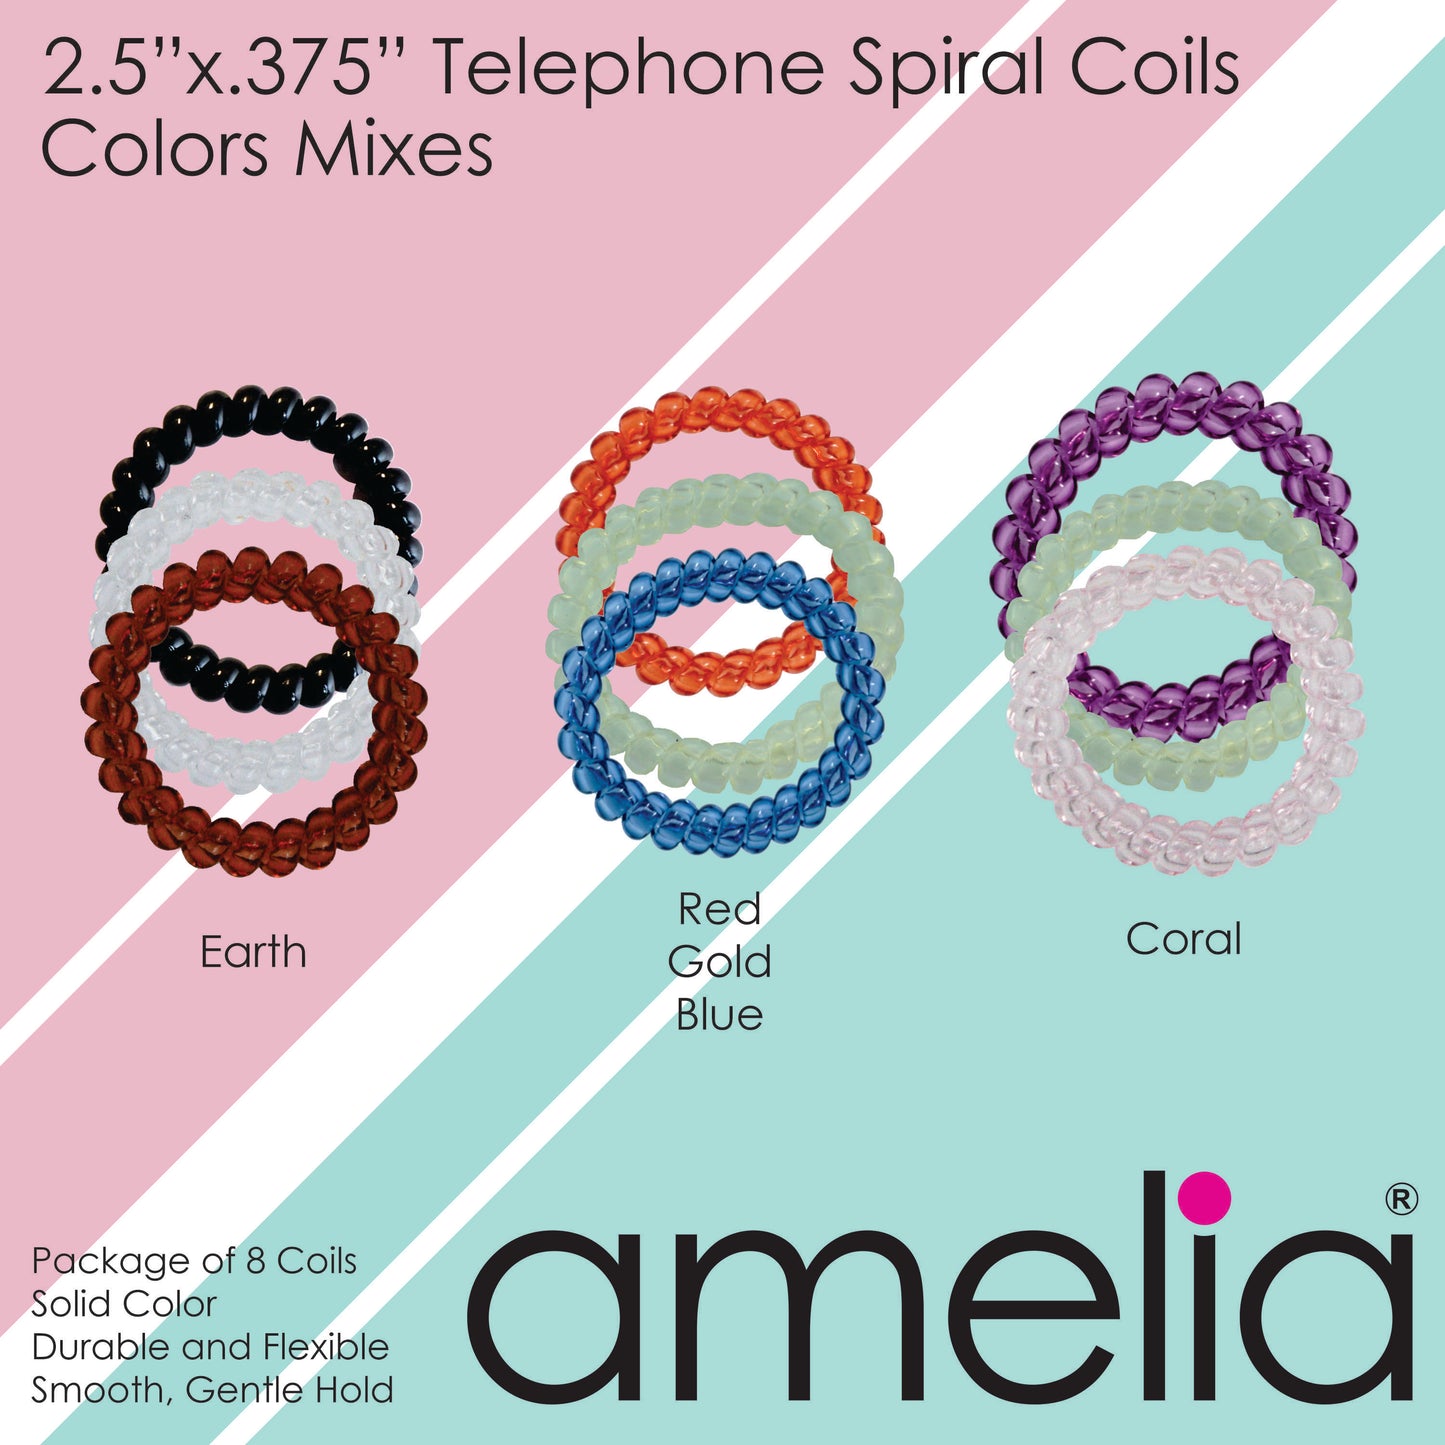 Amelia Beauty Products 8 Large Smooth Elastic Hair Coils, 2. 5in Diameter Thick Spiral Hair Ties, Gentle on Hair, Strong Hold and Minimizes Dents and Creases, Coral Tones